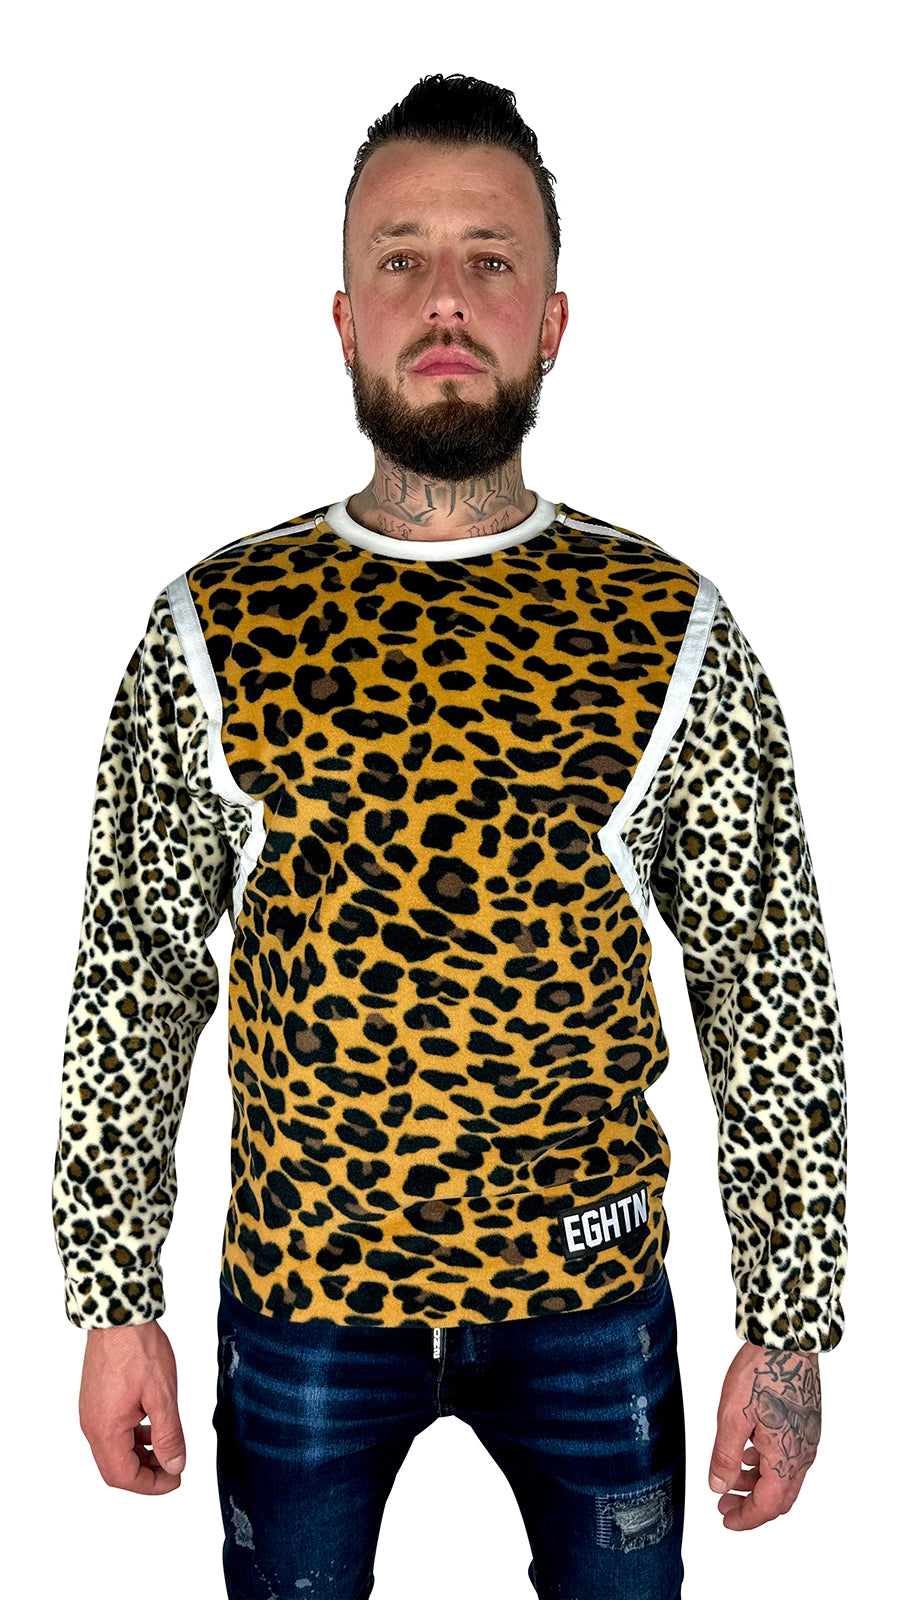 THE TIGER SWEATER